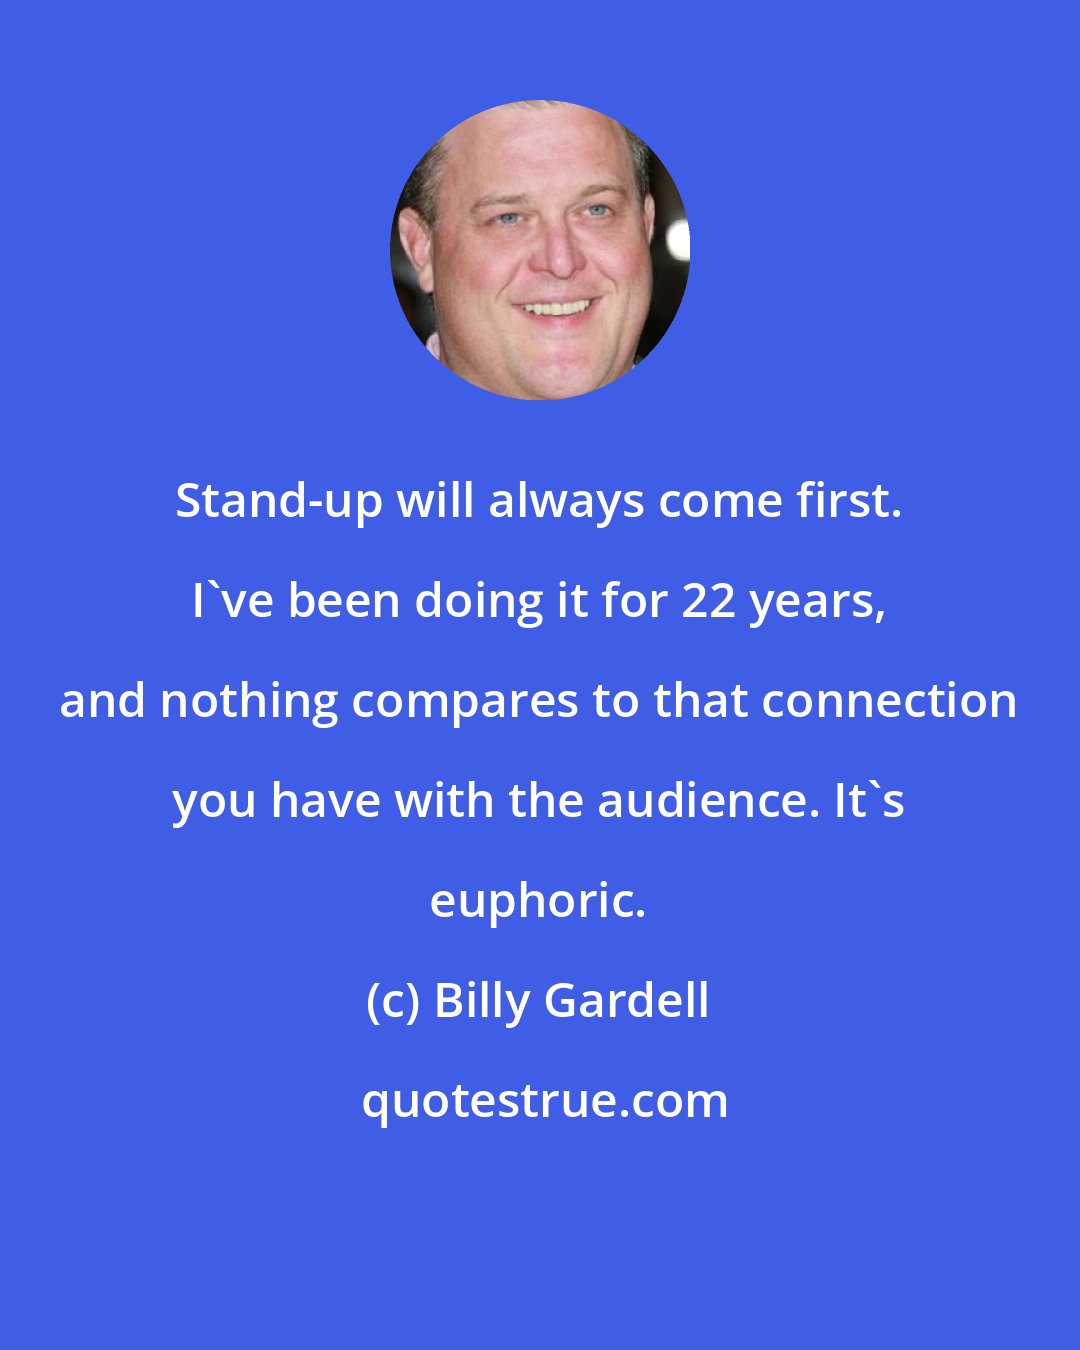 Billy Gardell: Stand-up will always come first. I've been doing it for 22 years, and nothing compares to that connection you have with the audience. It's euphoric.